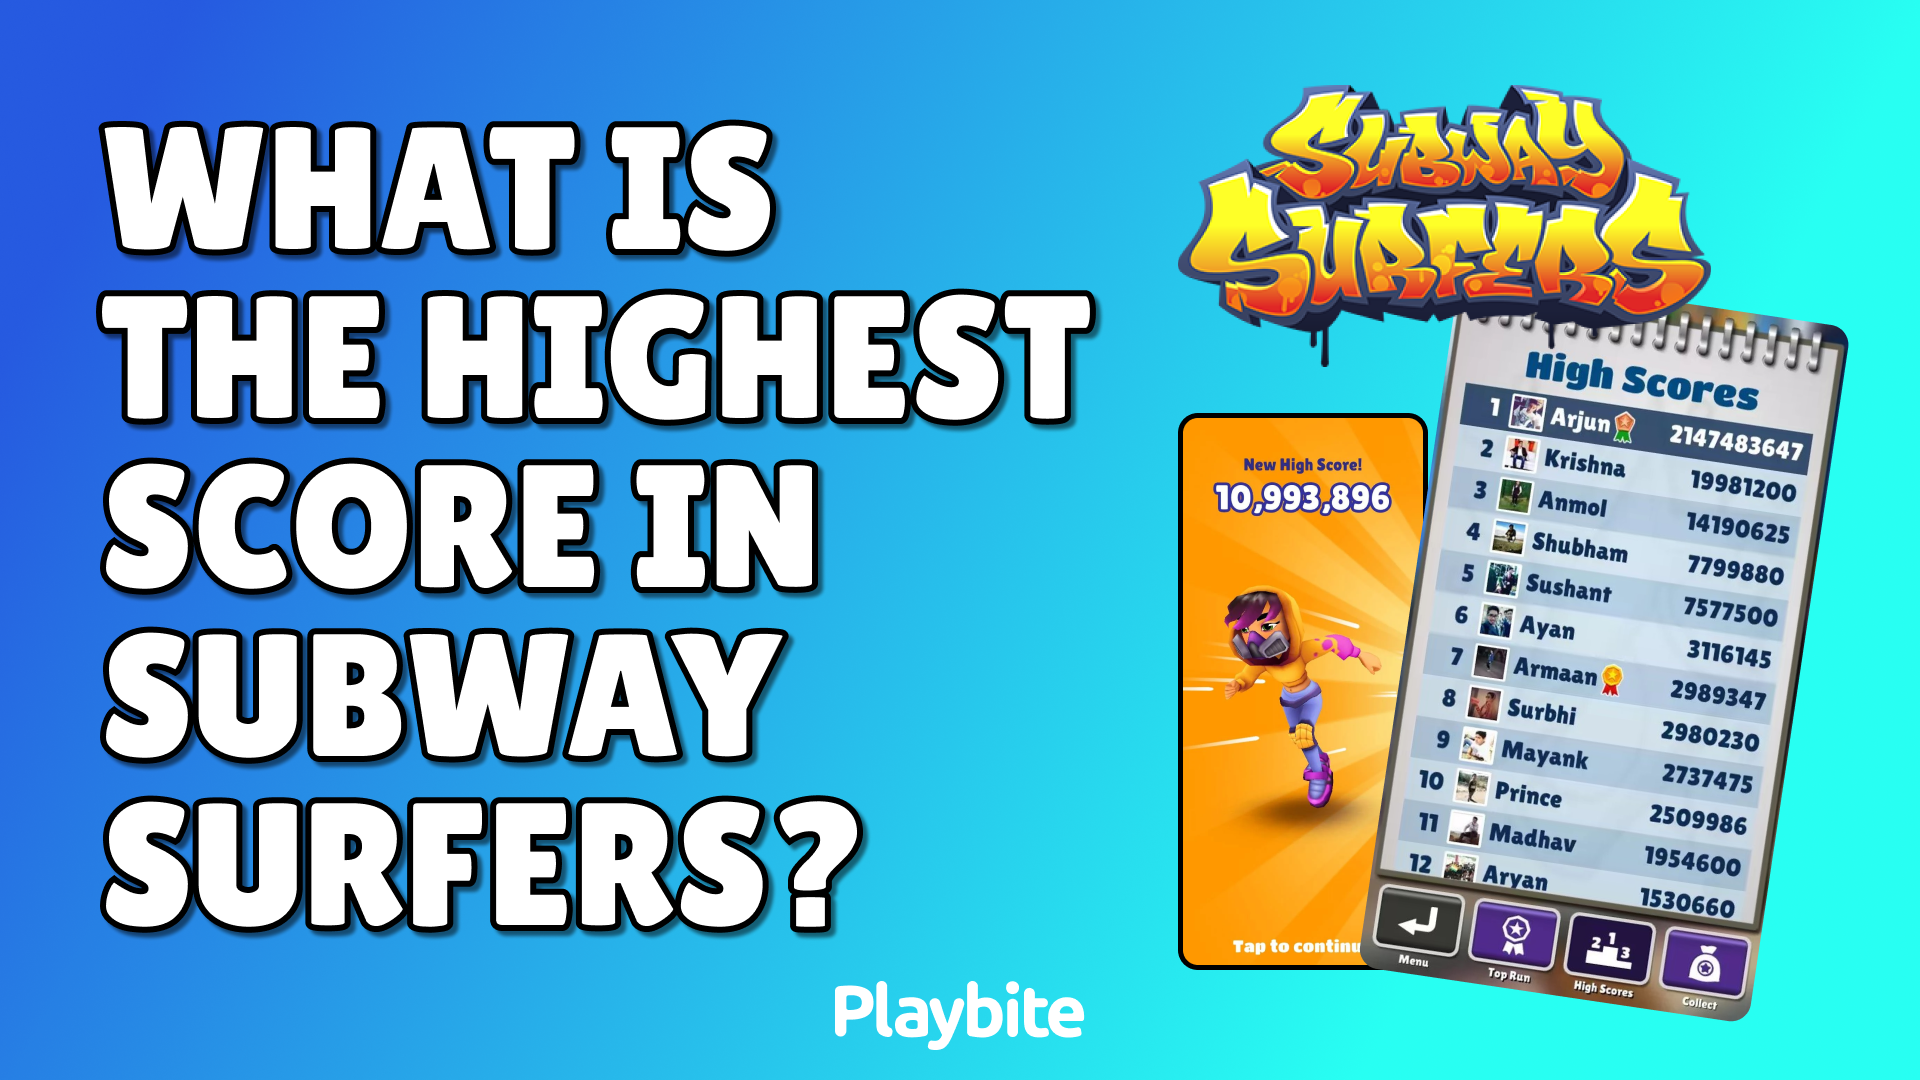 What Is The Highest Score In Subway Surfers?